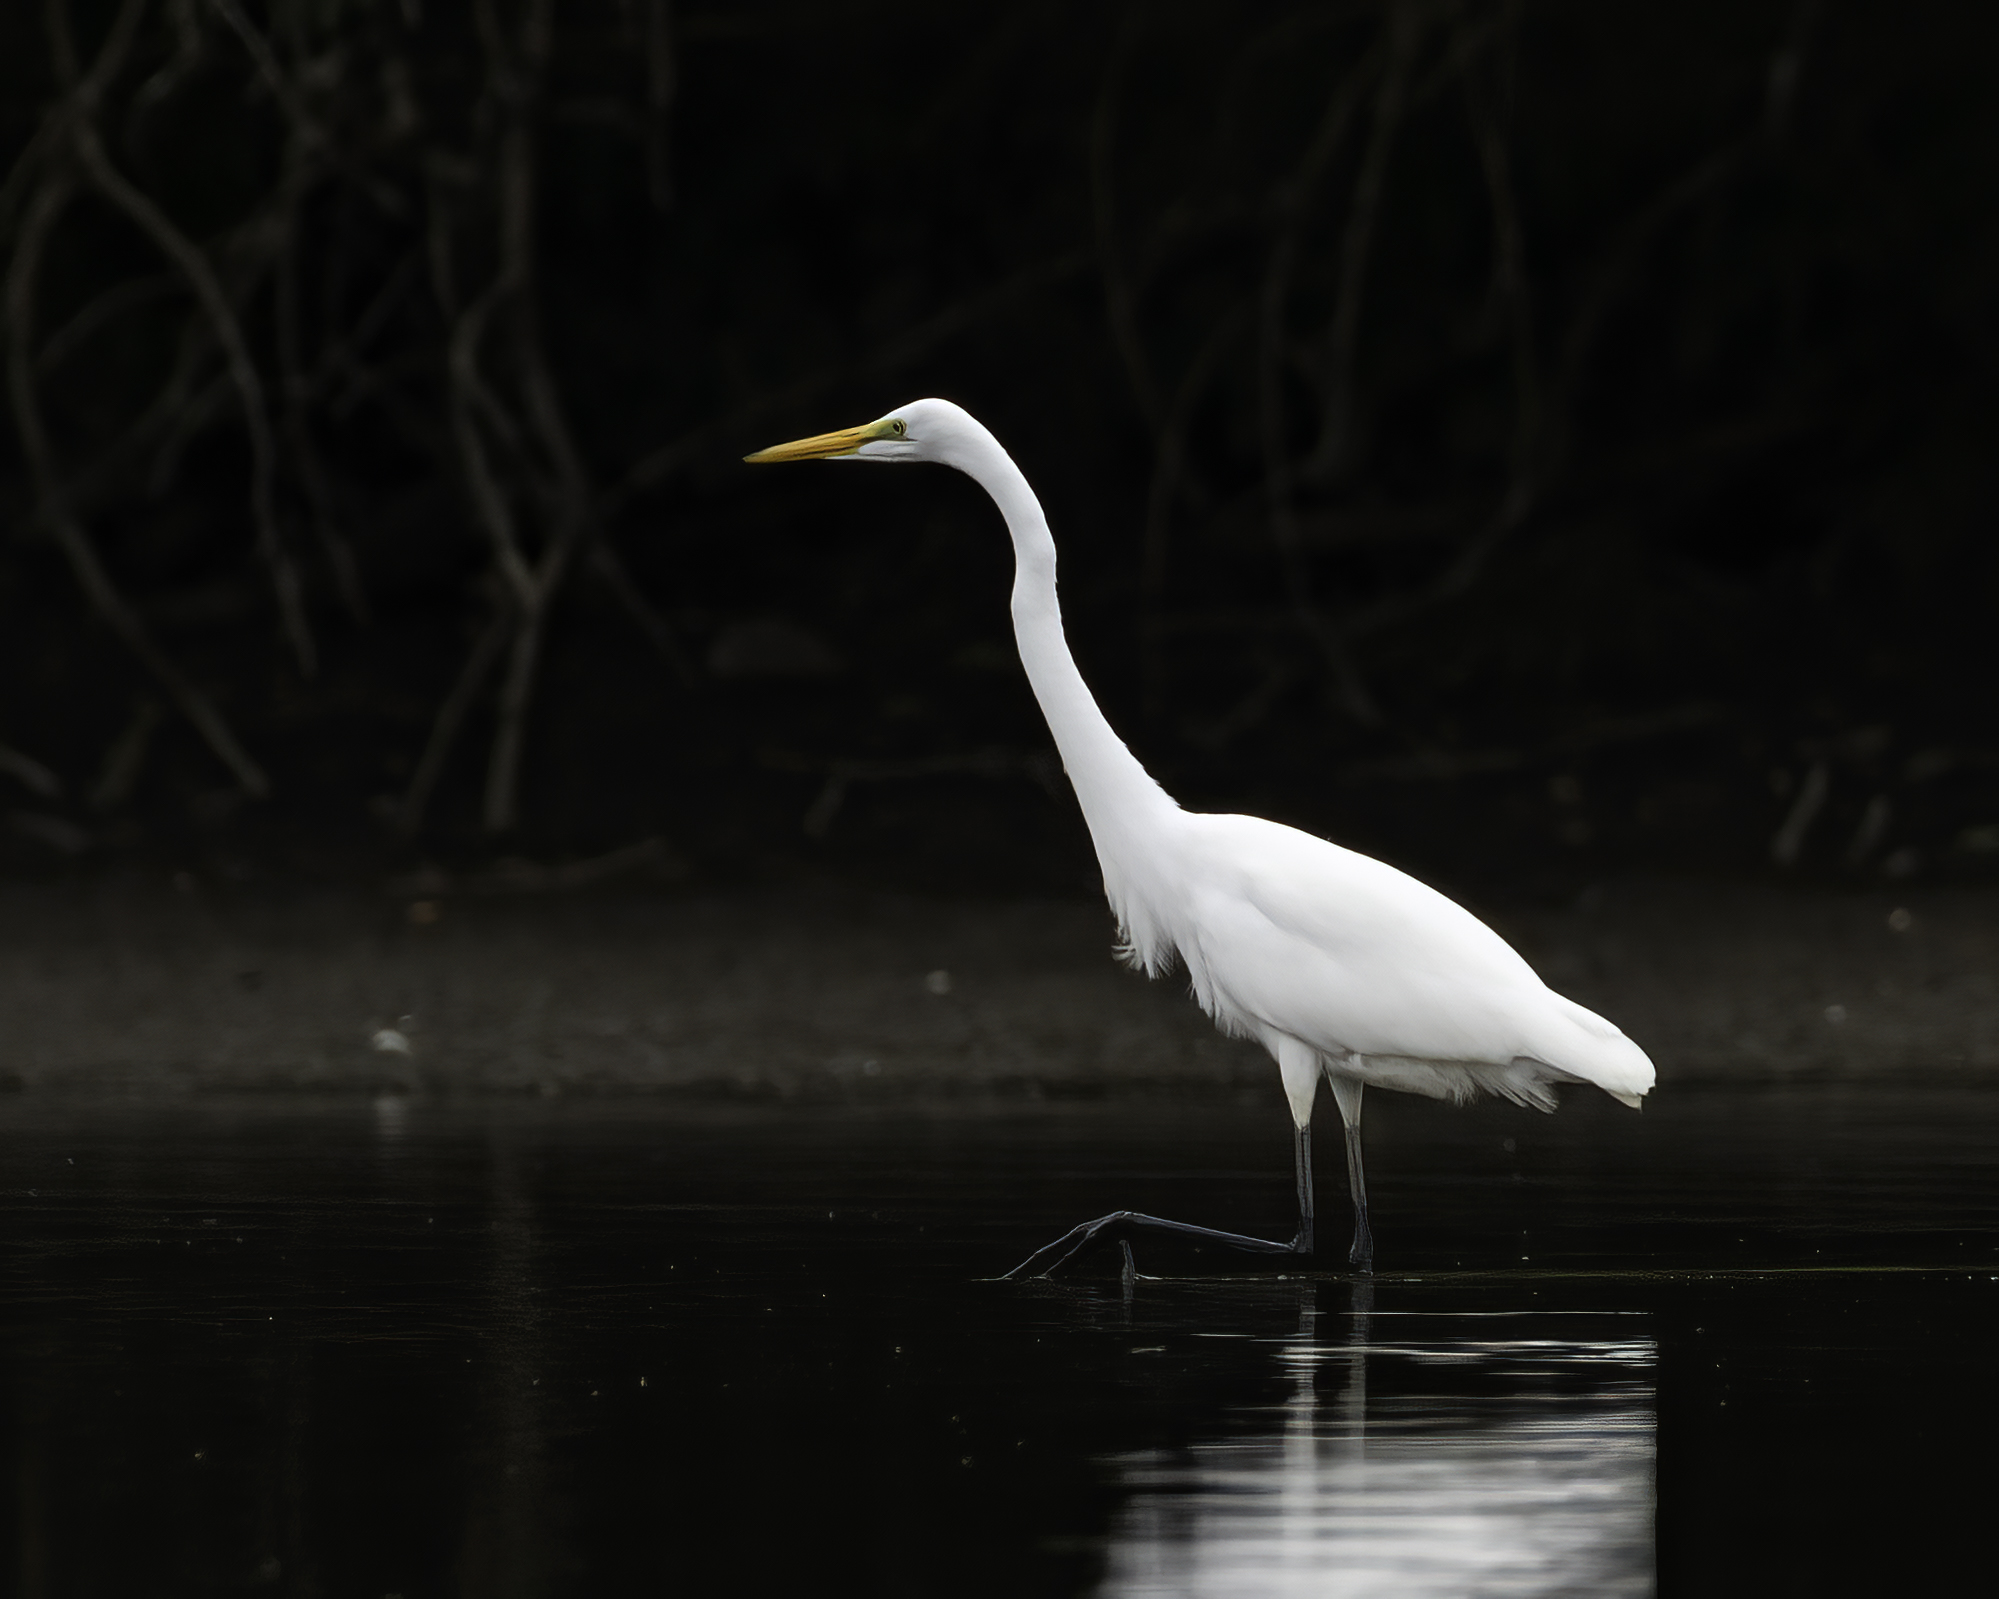 A Great Egret standing in a body of water